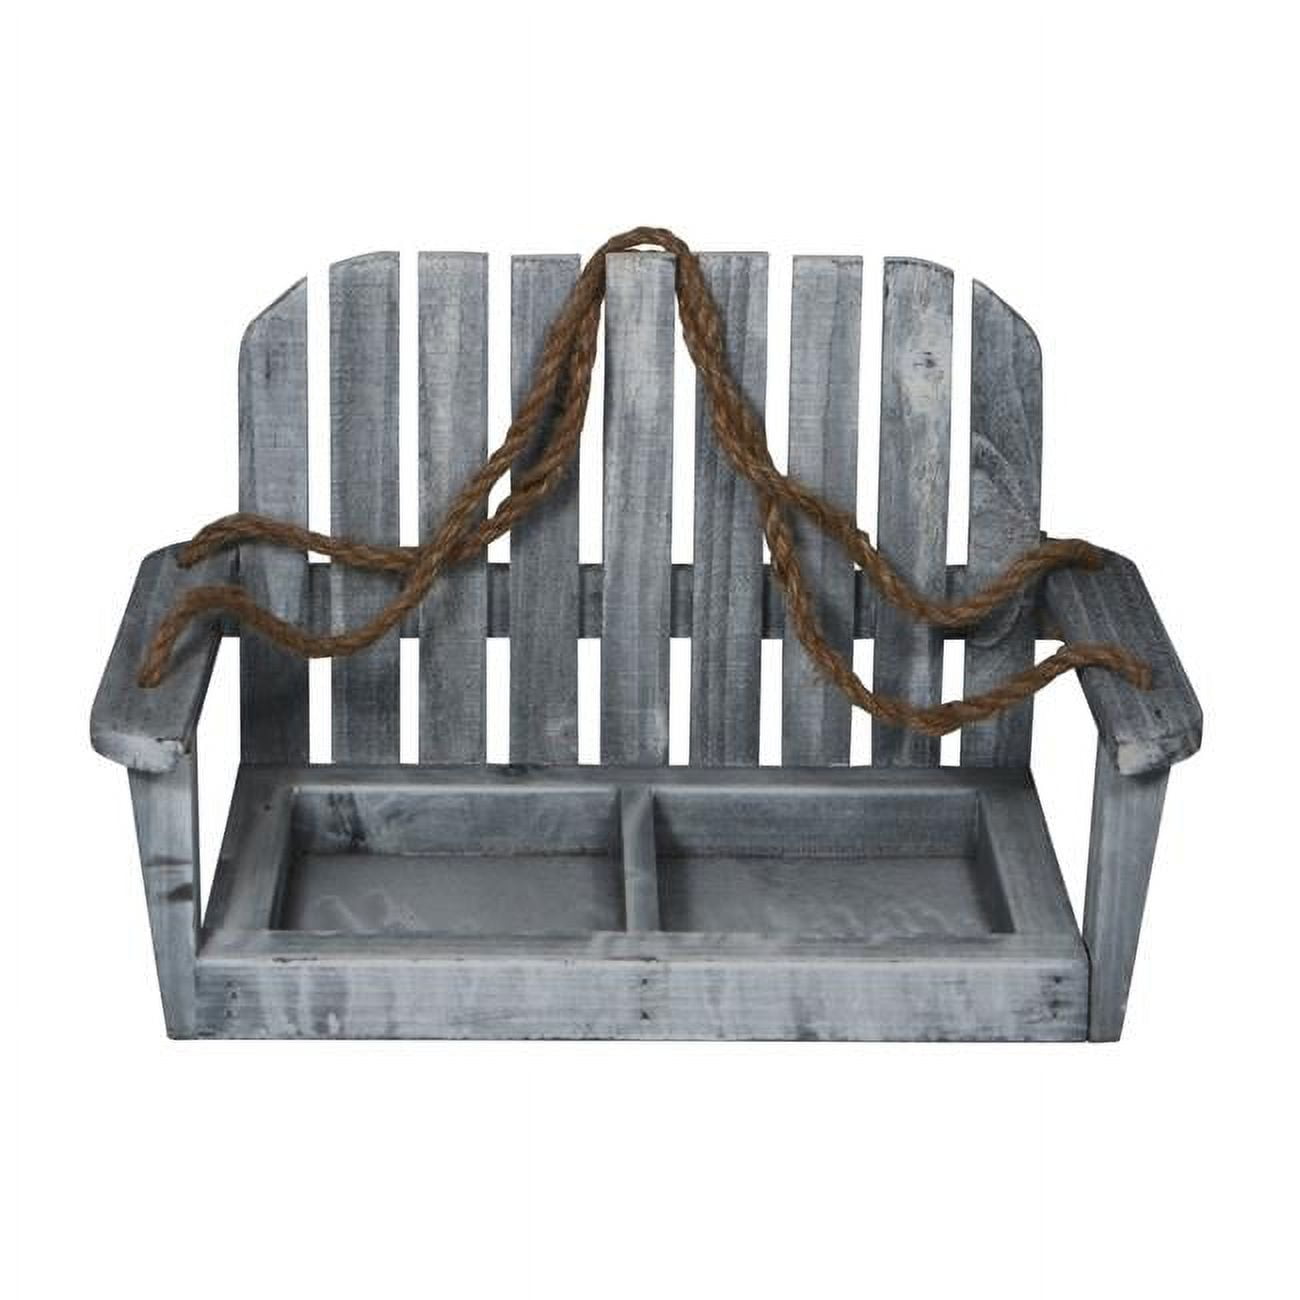 4957gw Wooden Hanging Chair With Double Pot Storage - Gray Wash